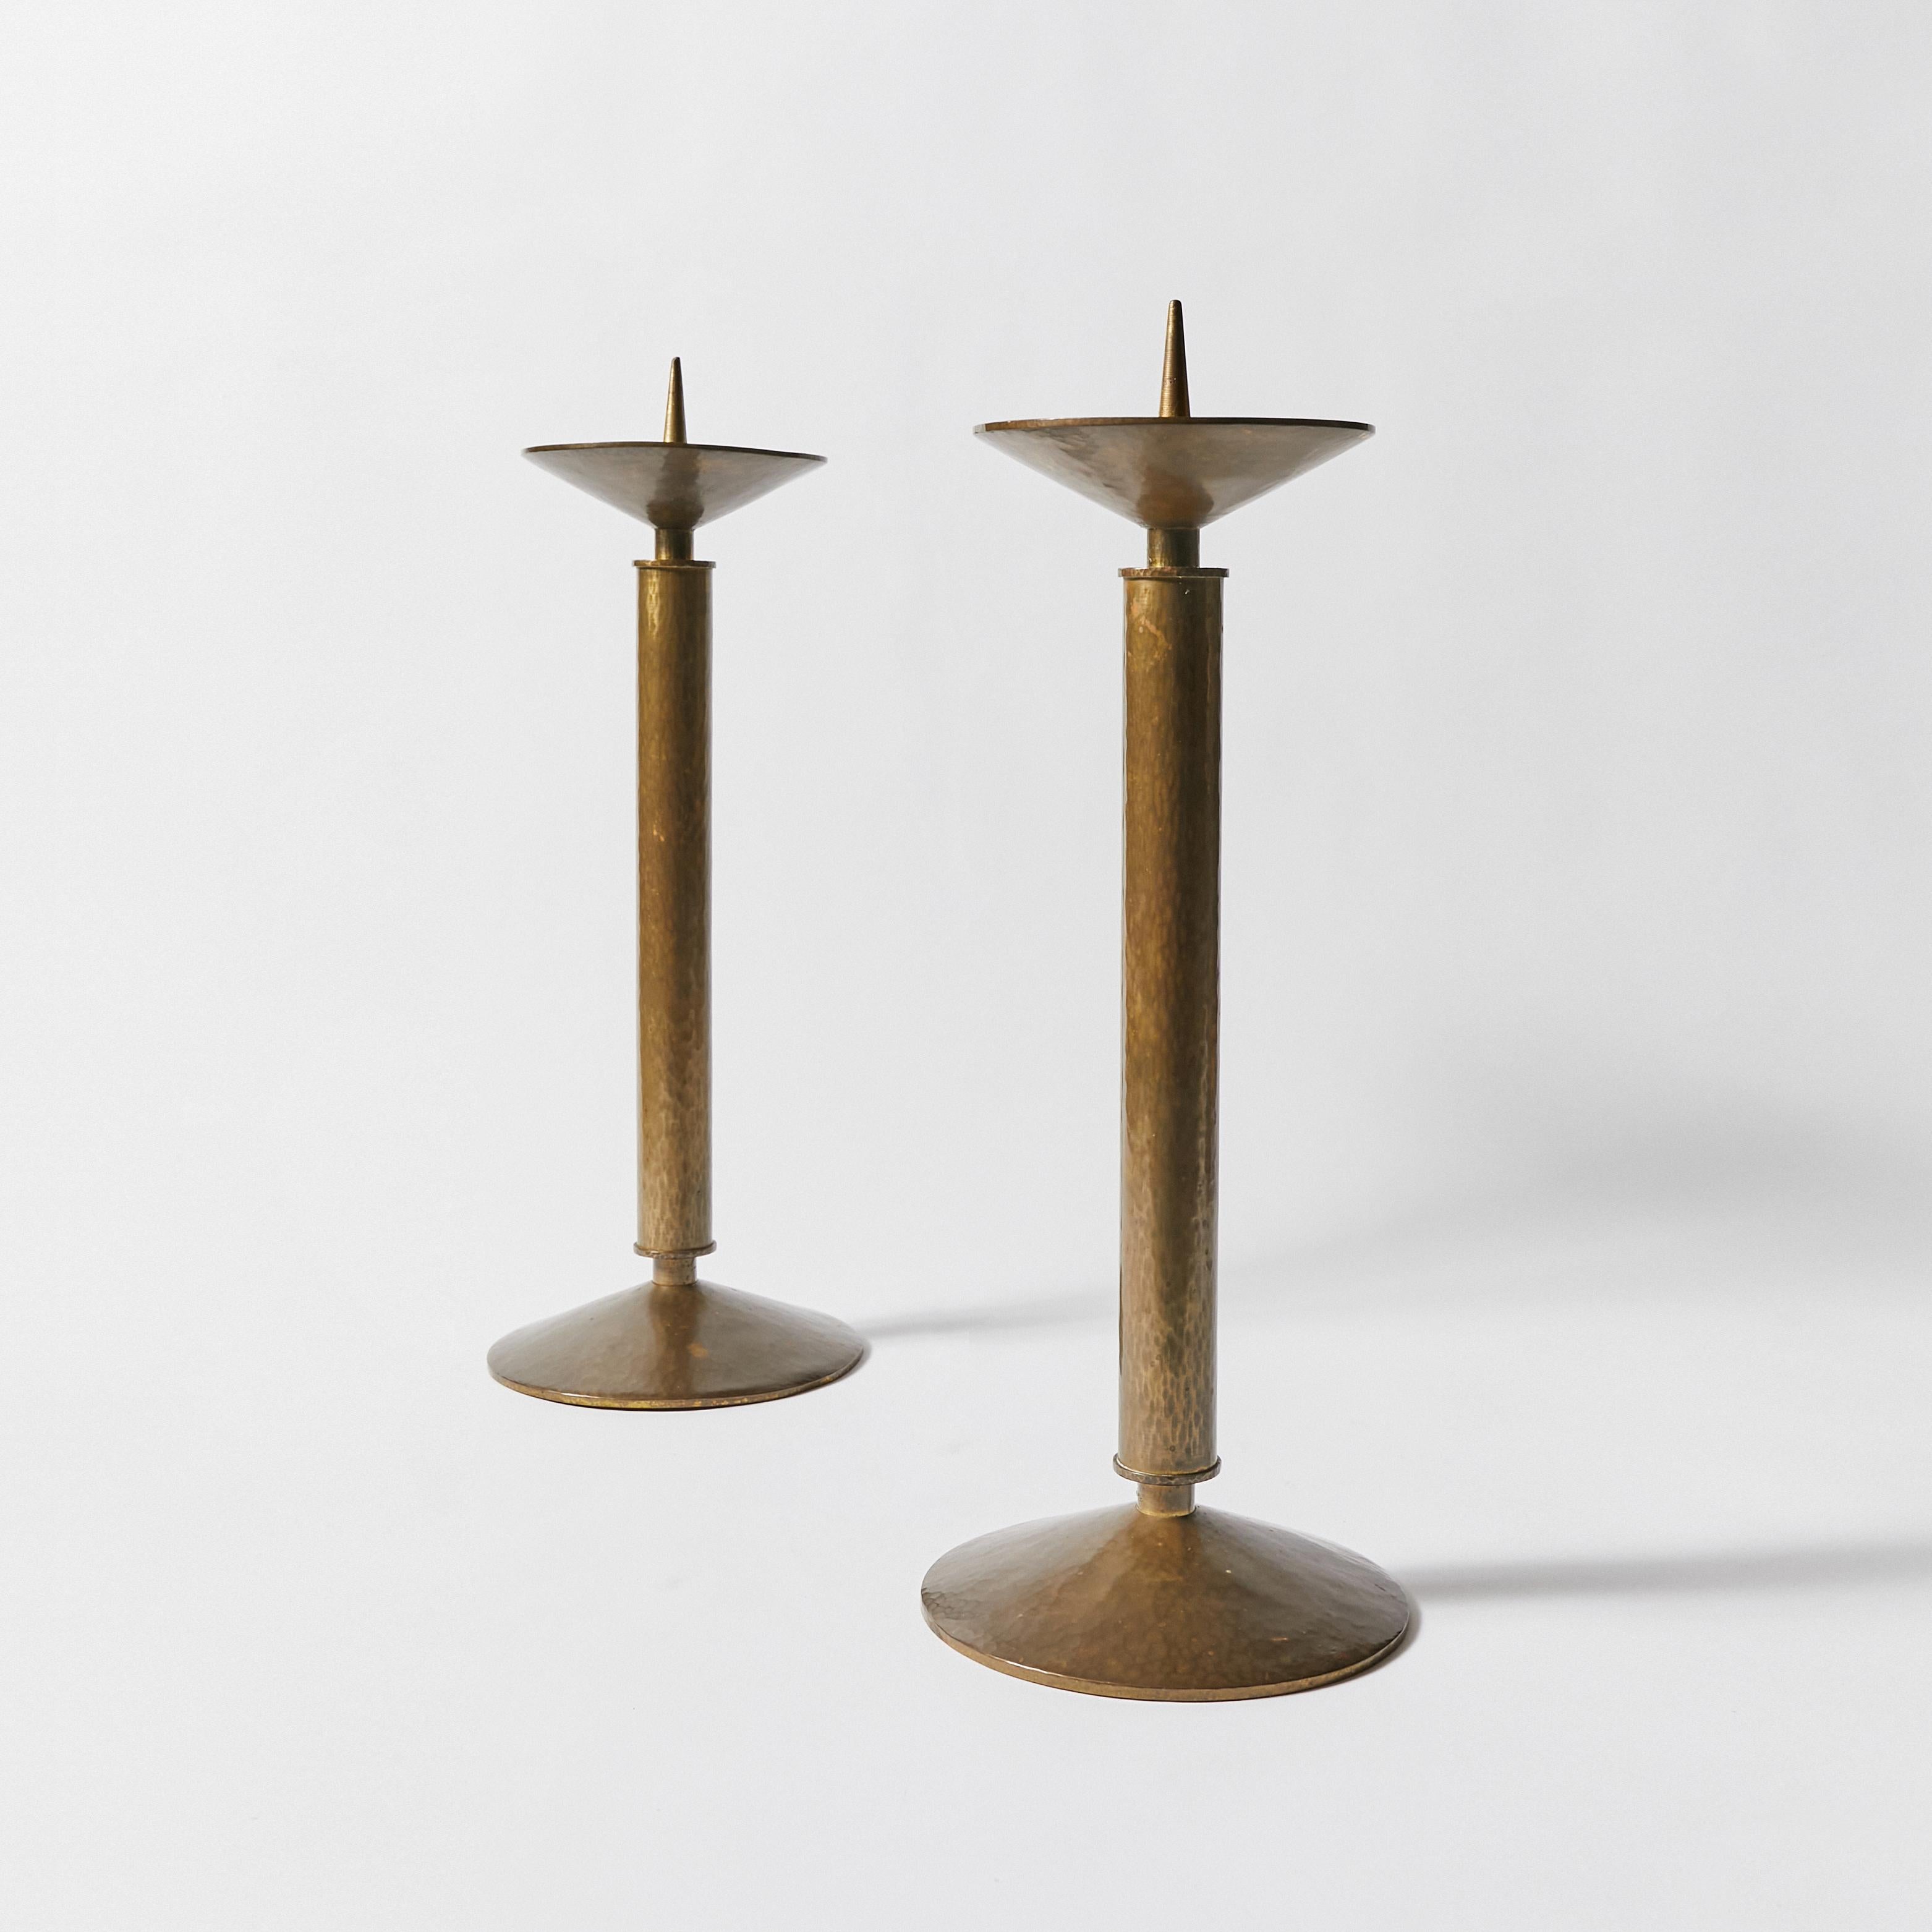 Set of two large Art Deco style candle holders. Made in bronze with beautiful original patina.